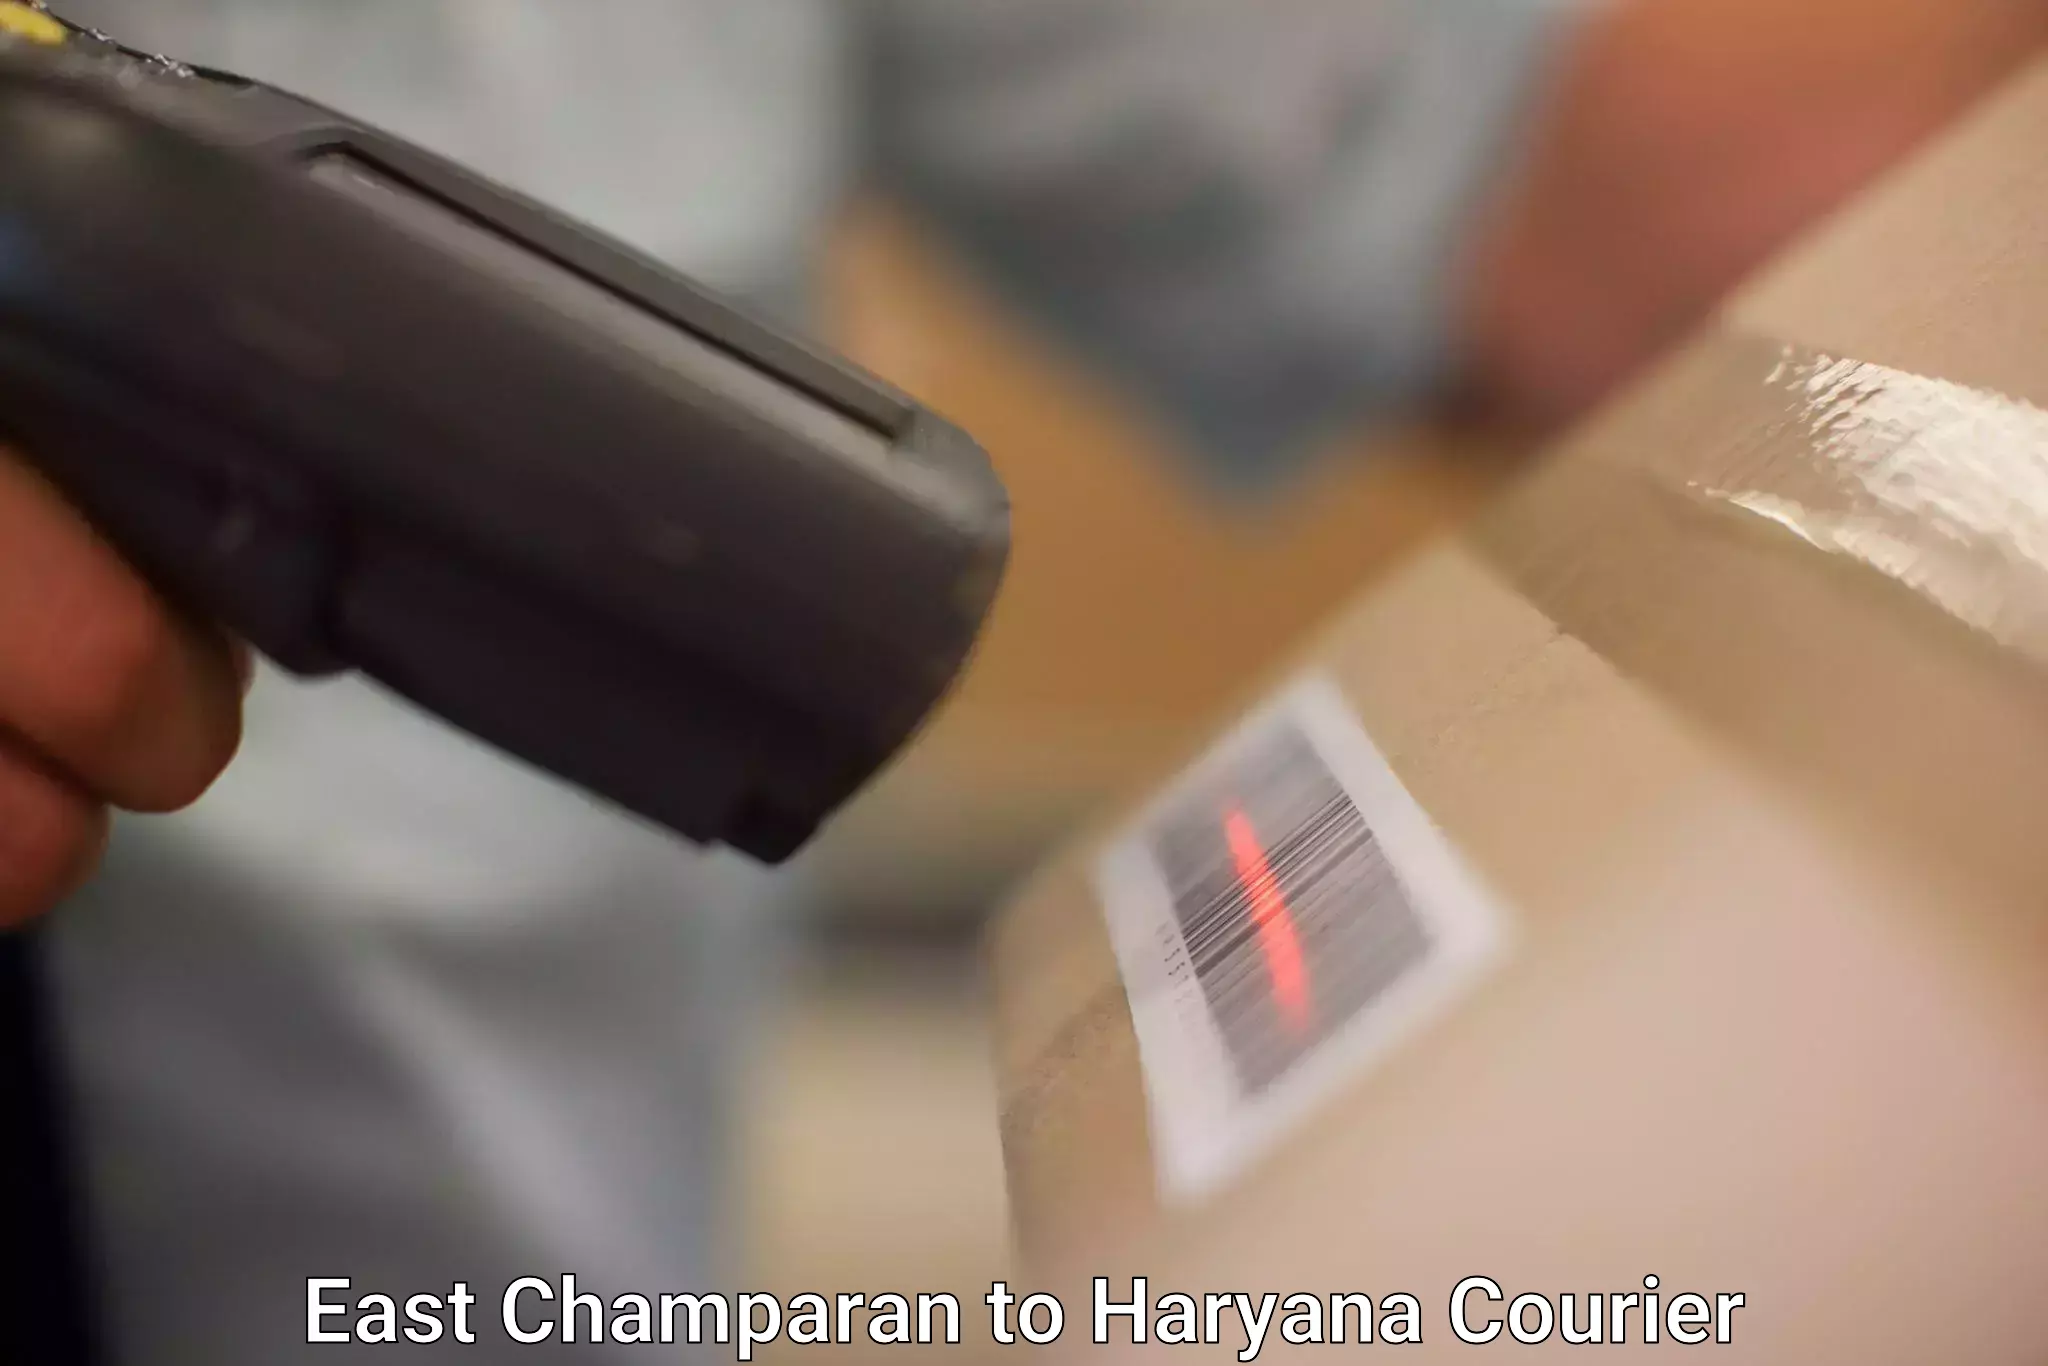 Multi-city courier East Champaran to NCR Haryana